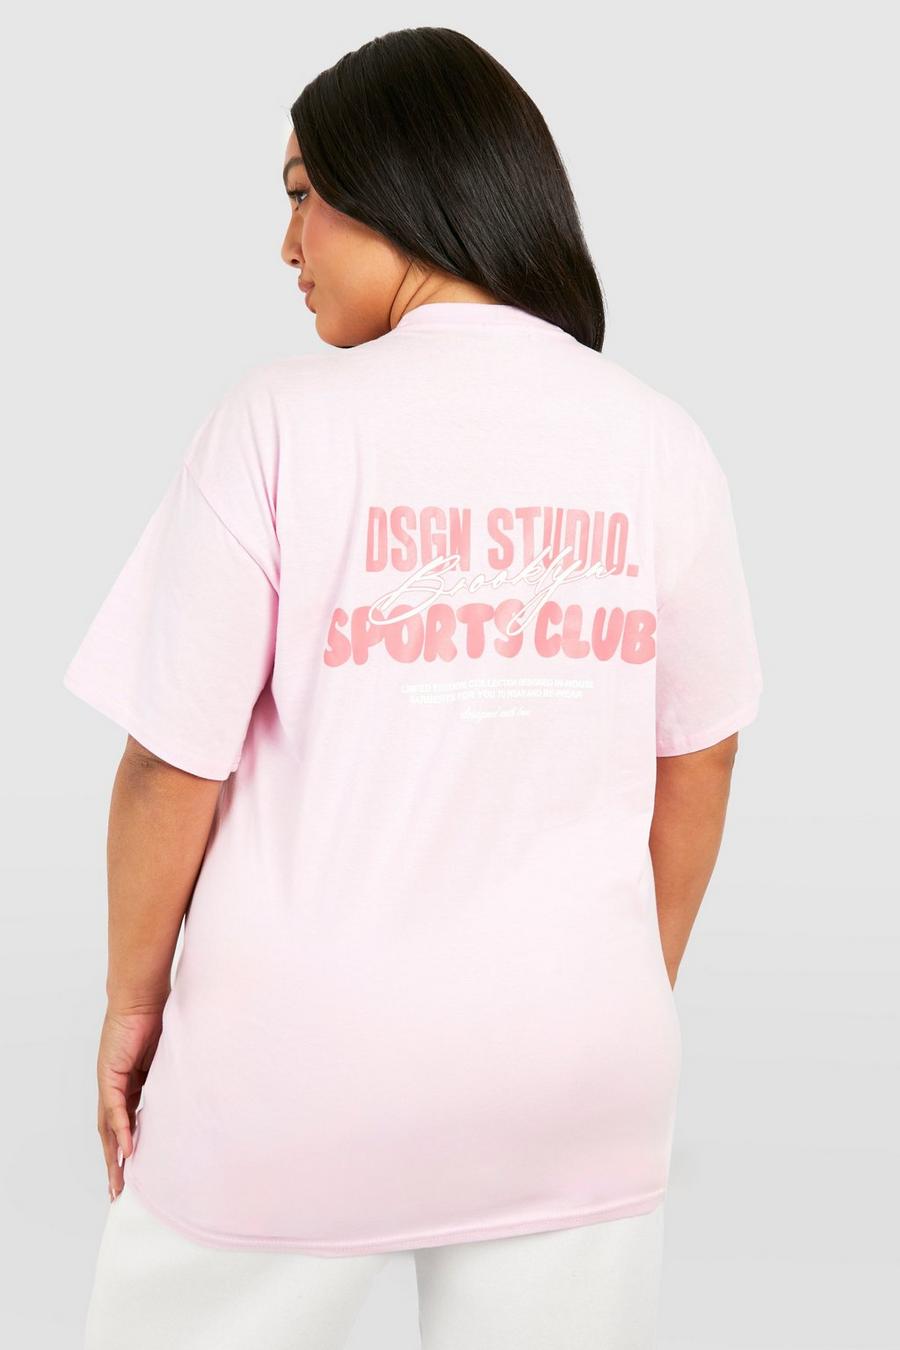 T-shirt Plus Size con scritta Dsgn Studio Brooklyn, Baby pink image number 1